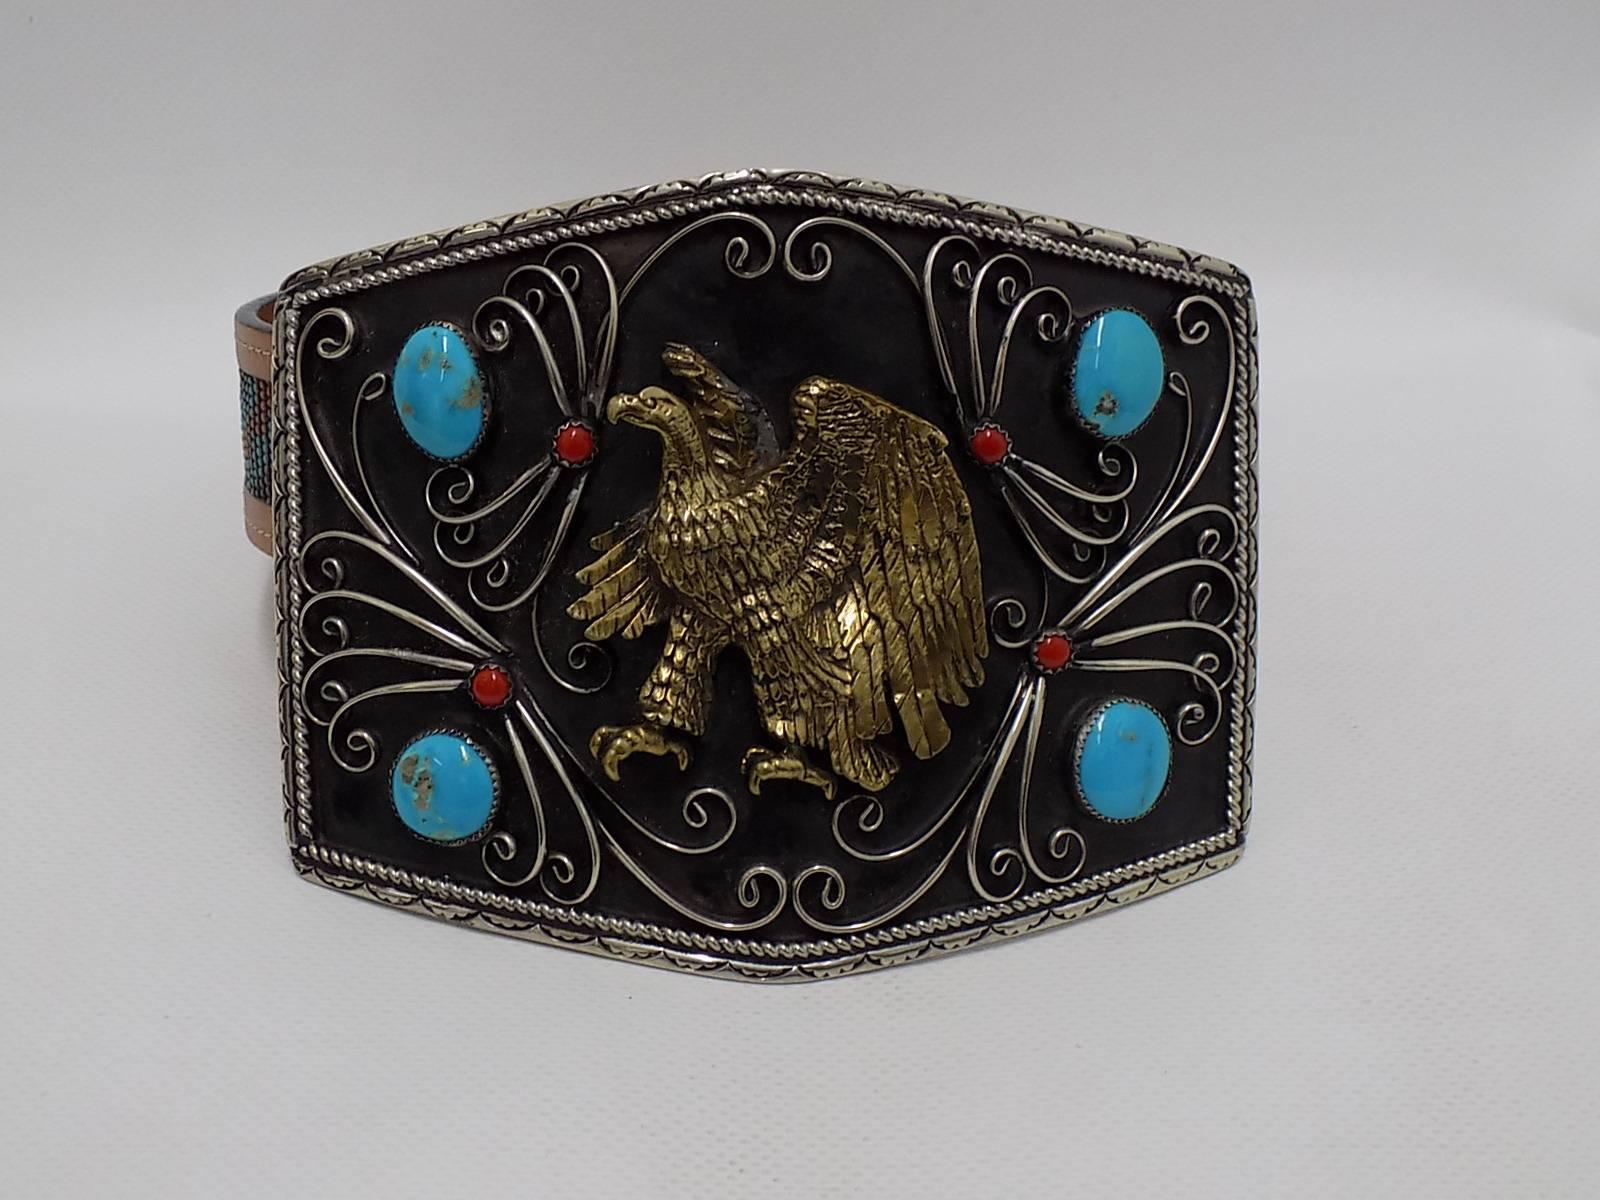 all hand crafted Cowboy legends massive silver  belt buckle  with genuine  and coral   turquoise /eagle hand carved eagle belt strapped is removable belt buckle measures 4 1/2 